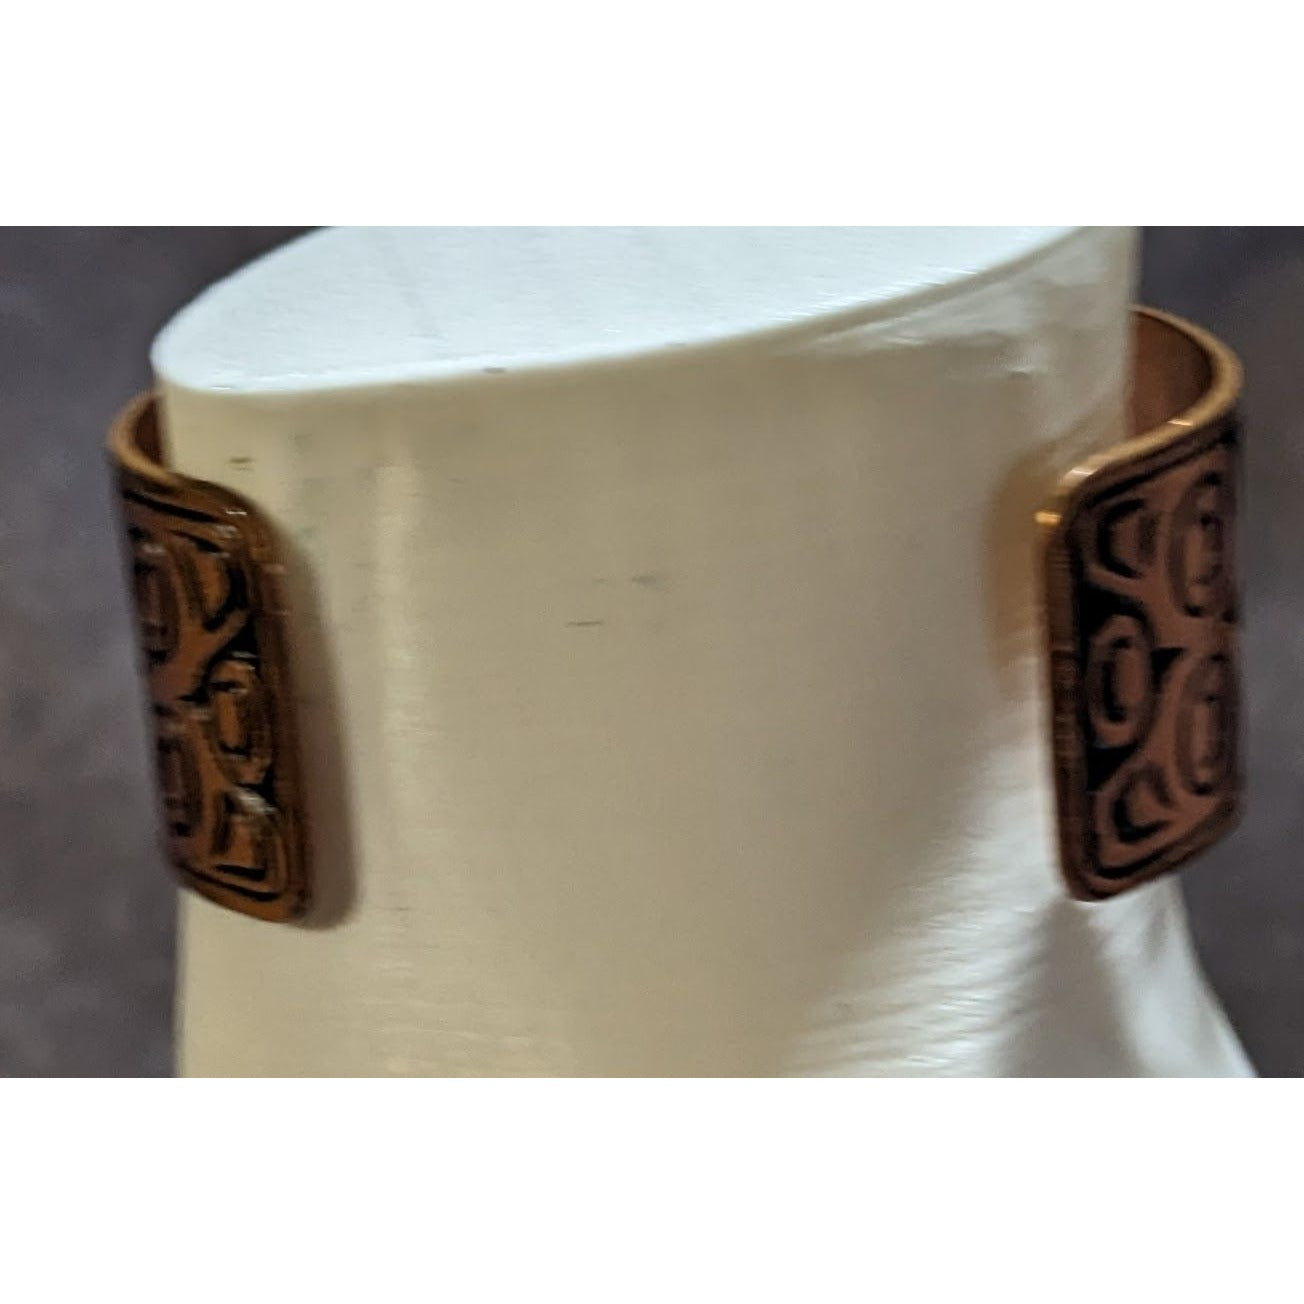 Vintage Bell Trading Company Solid Copper Cuff Bracelet